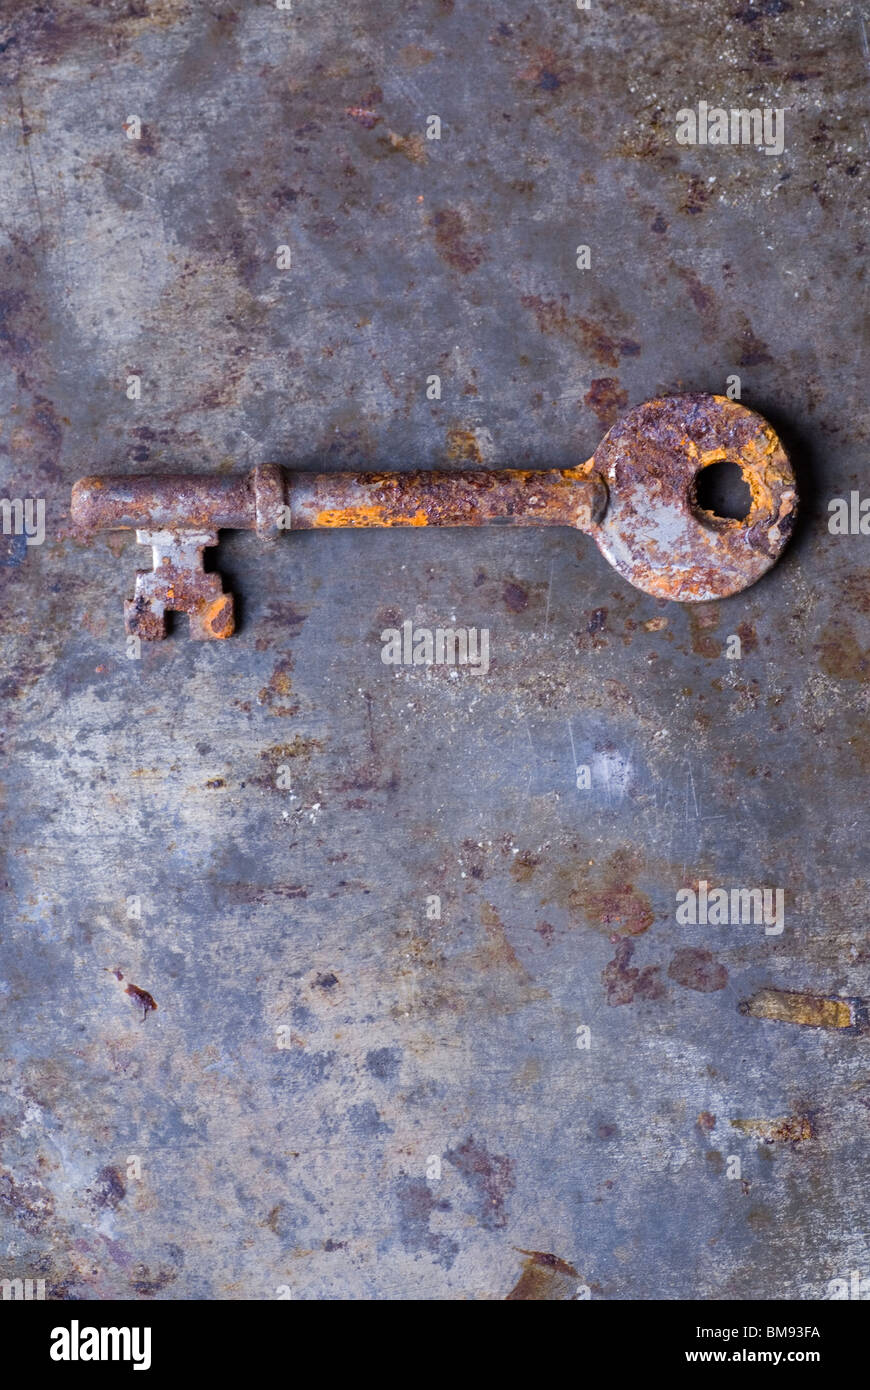 Dirty old rusted house key over a grunge background Stock Photo